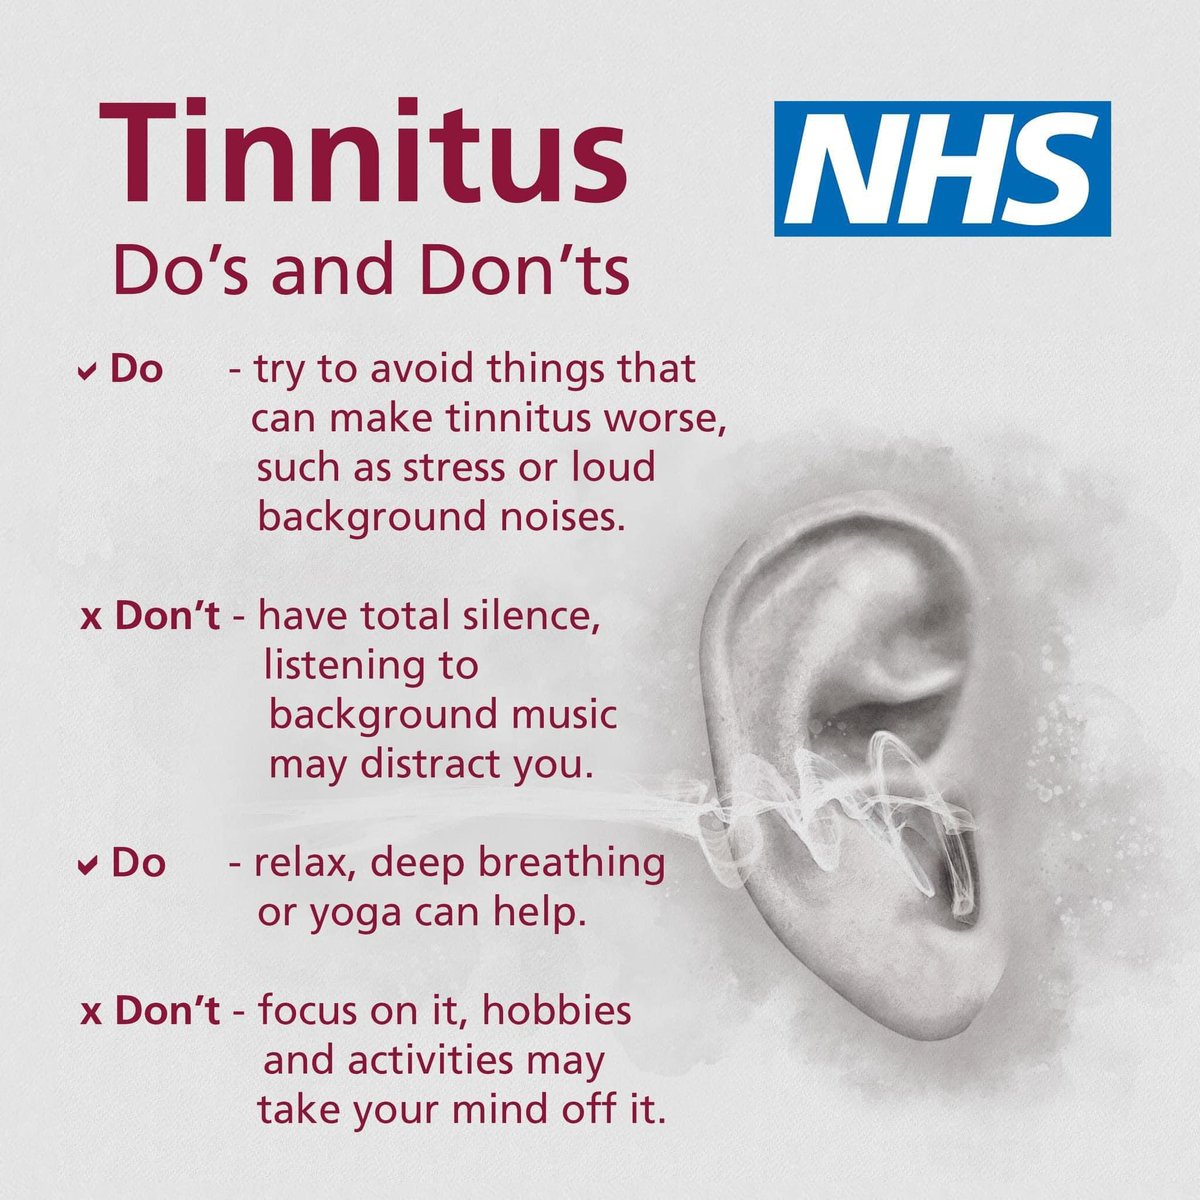 If you have tinnitus, there are things you can try that may help make your symptoms less noticeable.

If your tinnitus is bothering you or getting worse, get in touch with your GP or audiologist. 

#TinnitusWeek #wiganhearing #connectingwigan #WiganBusiness #earwaxremoval #wigan